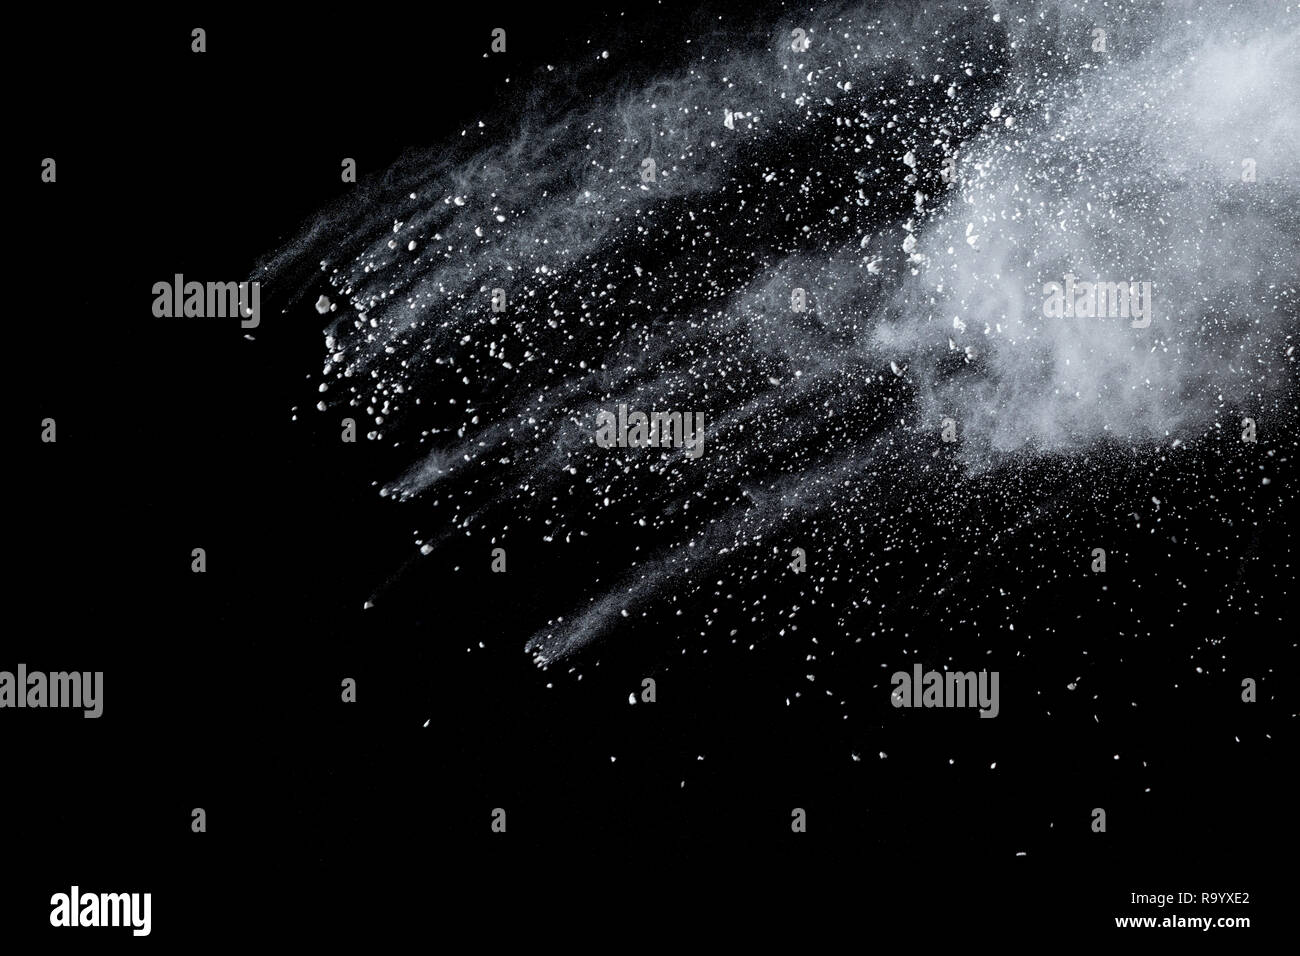 Bizarre forms of  white powder explosion cloud against dark background. Launched white particle splash on black background Stock Photo